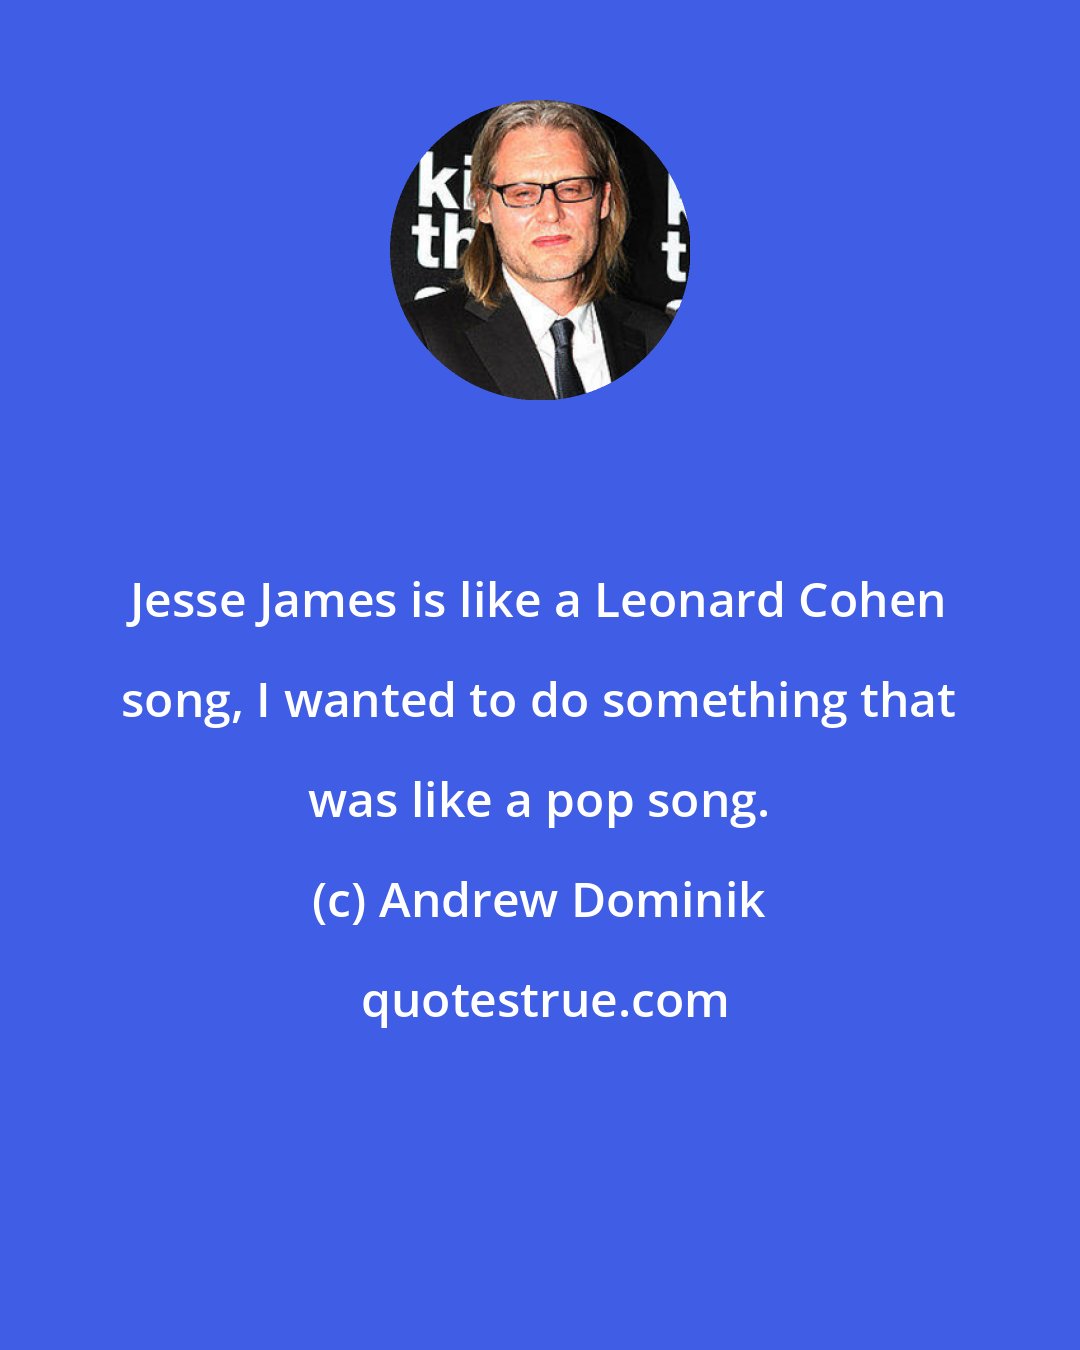 Andrew Dominik: Jesse James is like a Leonard Cohen song, I wanted to do something that was like a pop song.